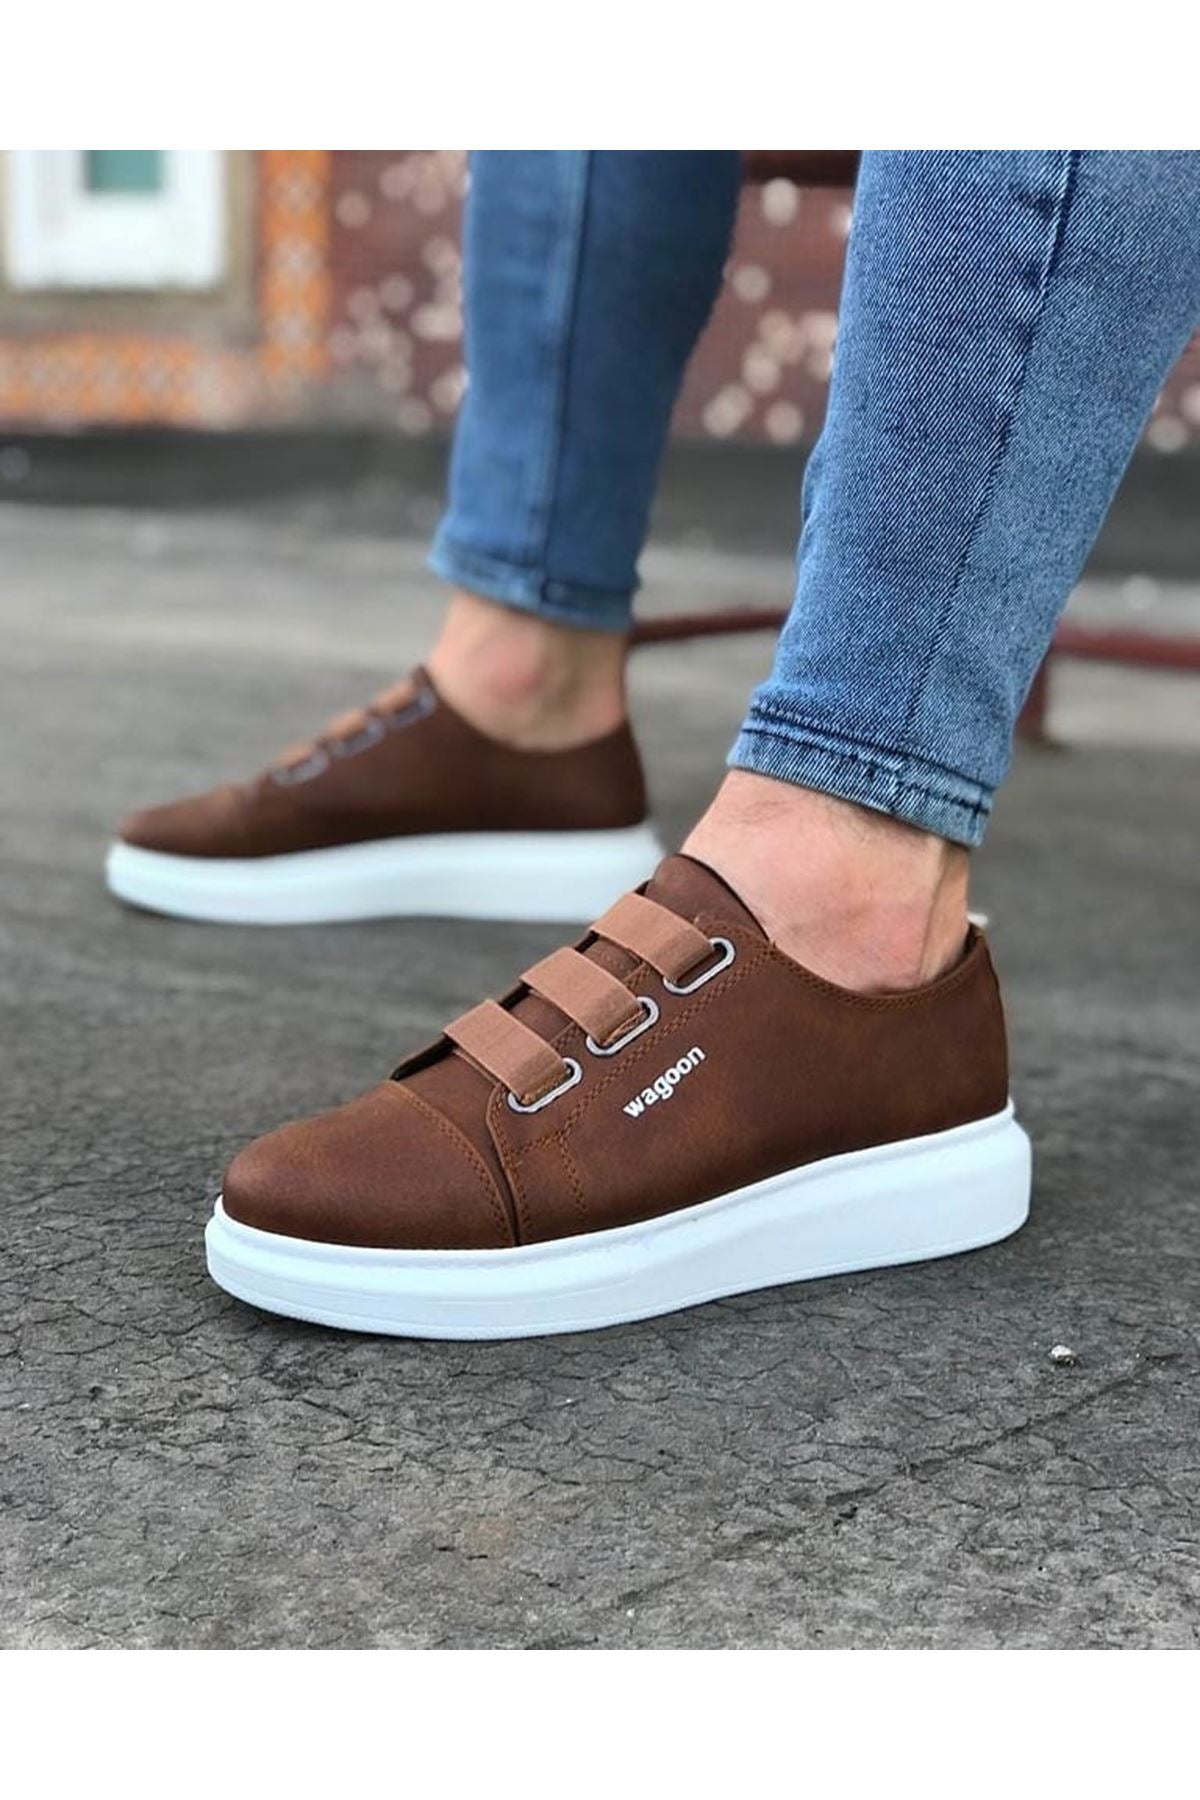 WG026 3 Band Tan Thick Sole Casual Men's Shoes - STREETMODE ™